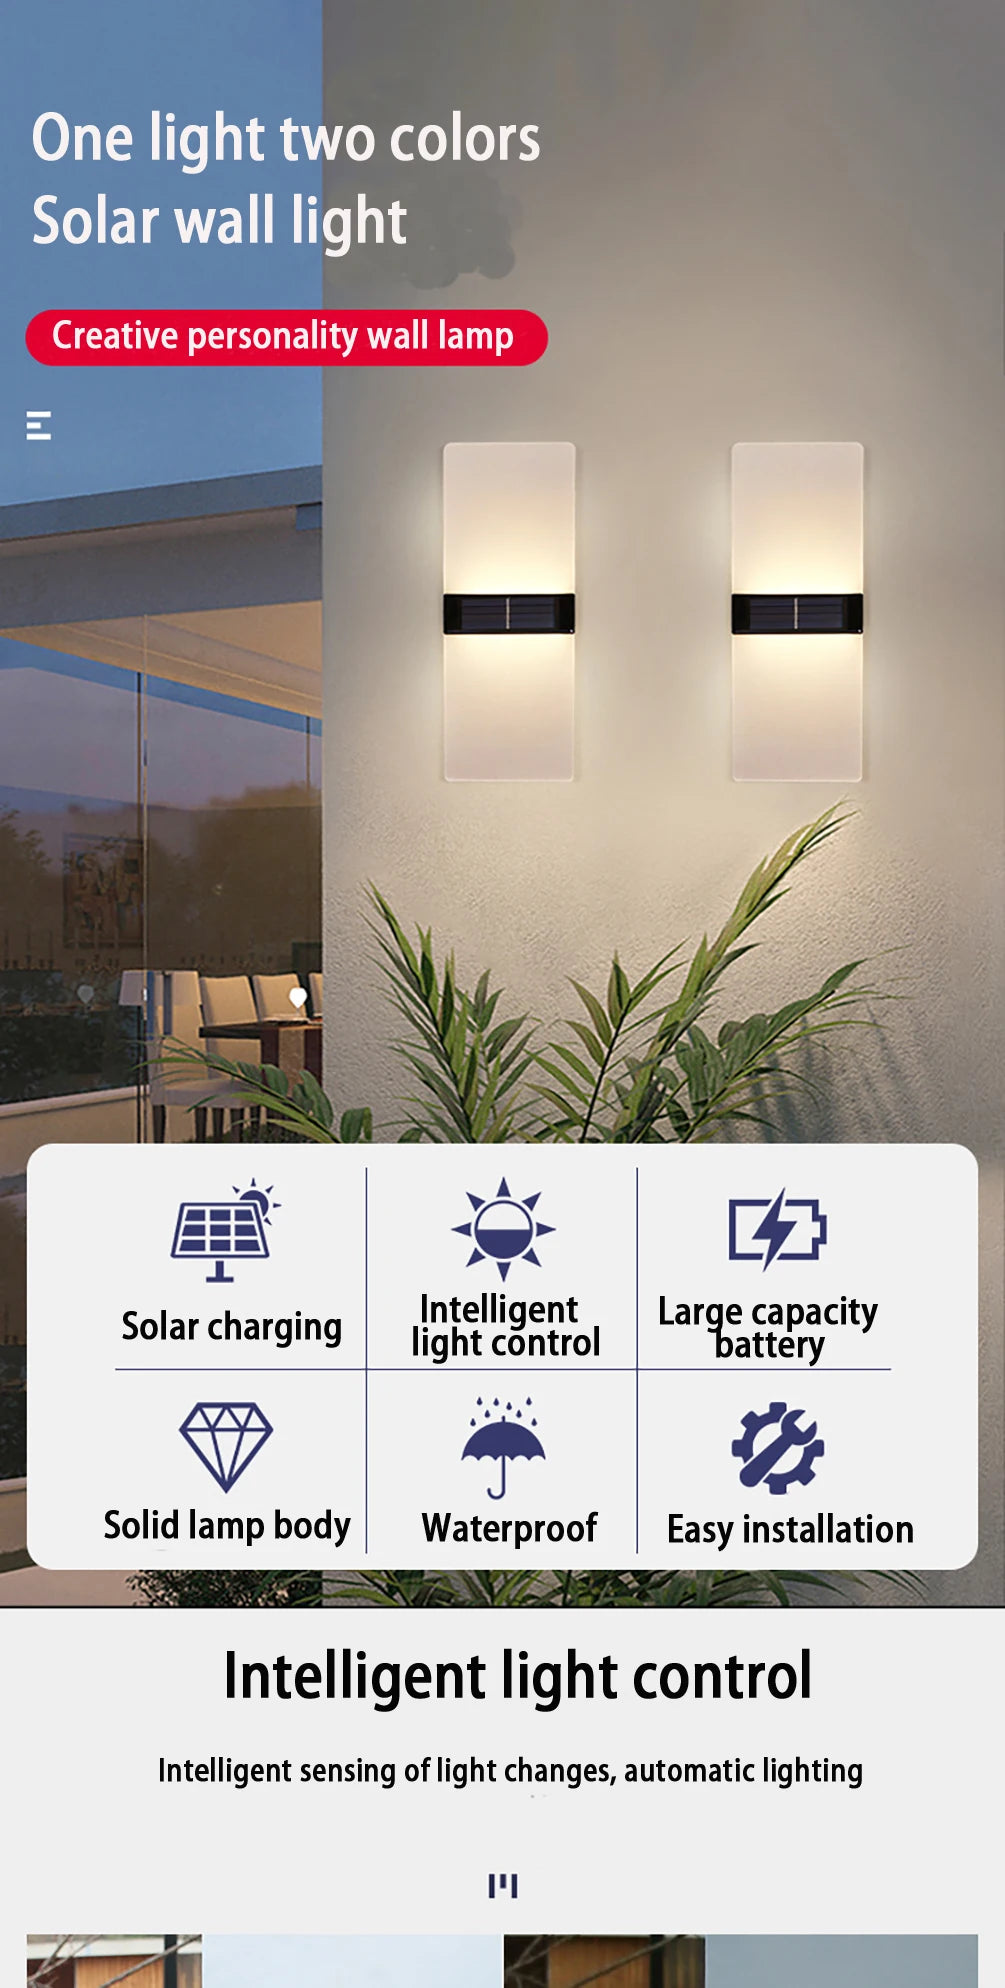 LED Solar Wall Light, LED Solar-Powered Wall Light with Waterproof Design, Easy Installation, and Intelligent Sensing.